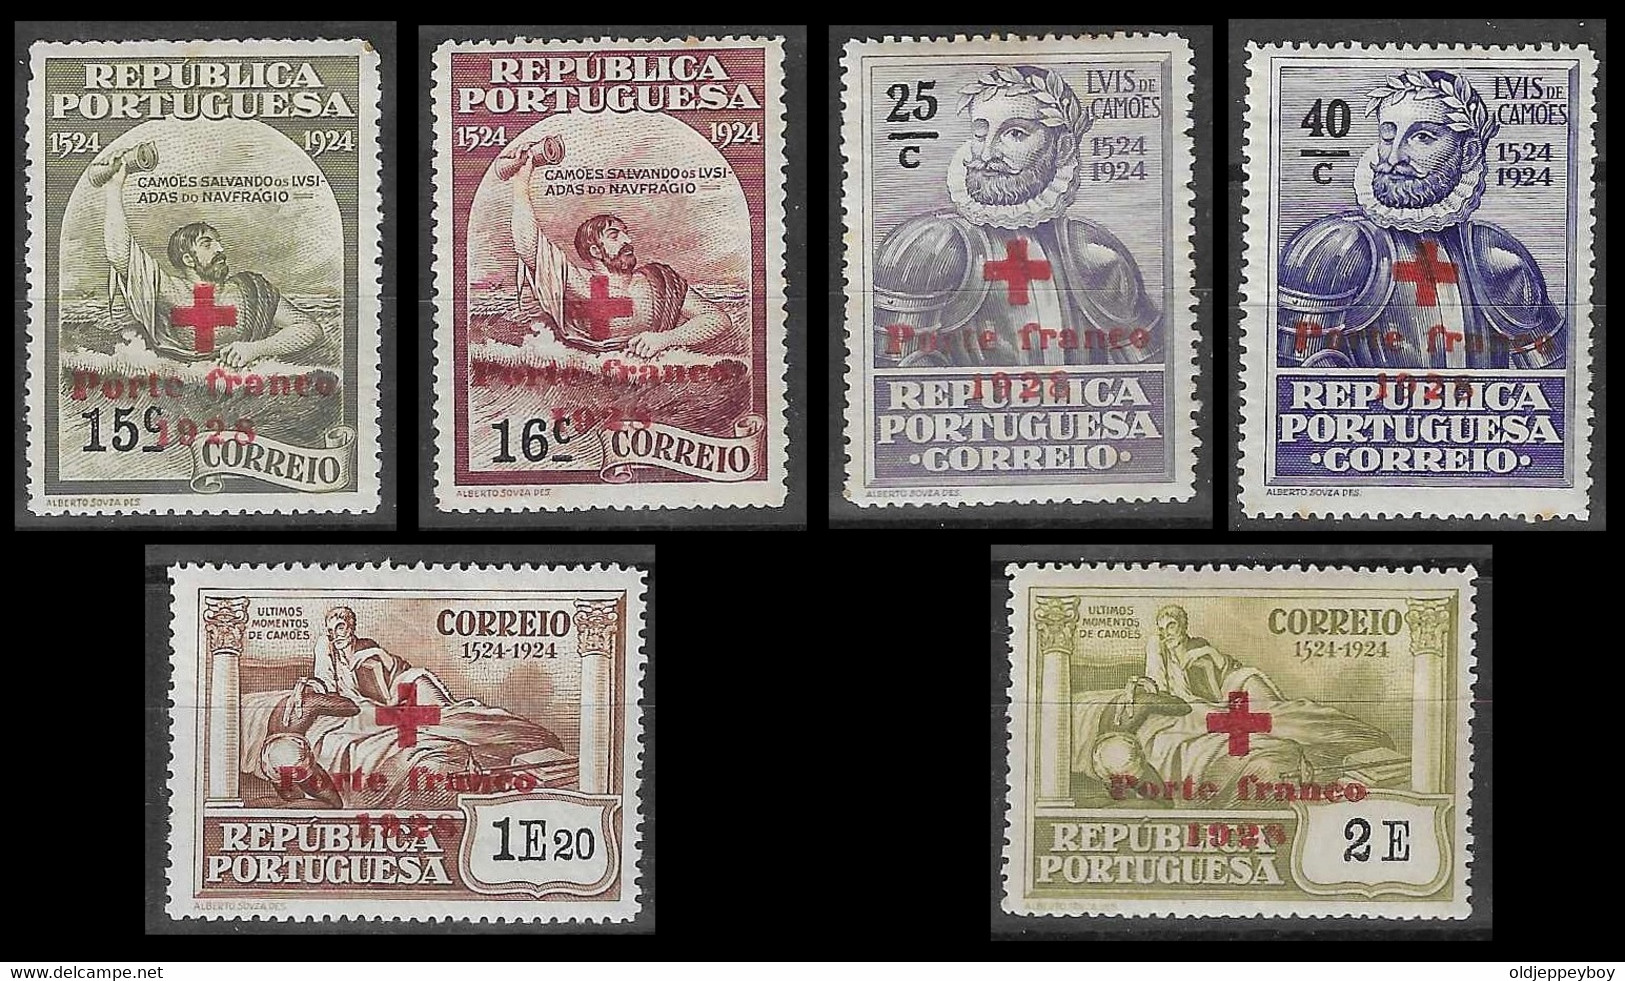 CROIX ROUGE CRUZ VERMELHA  Portugal - 1928 Camoes Franchise Red Cross (Complete Set) - Af. PF 11 To 16 - MH - Croce Rossa